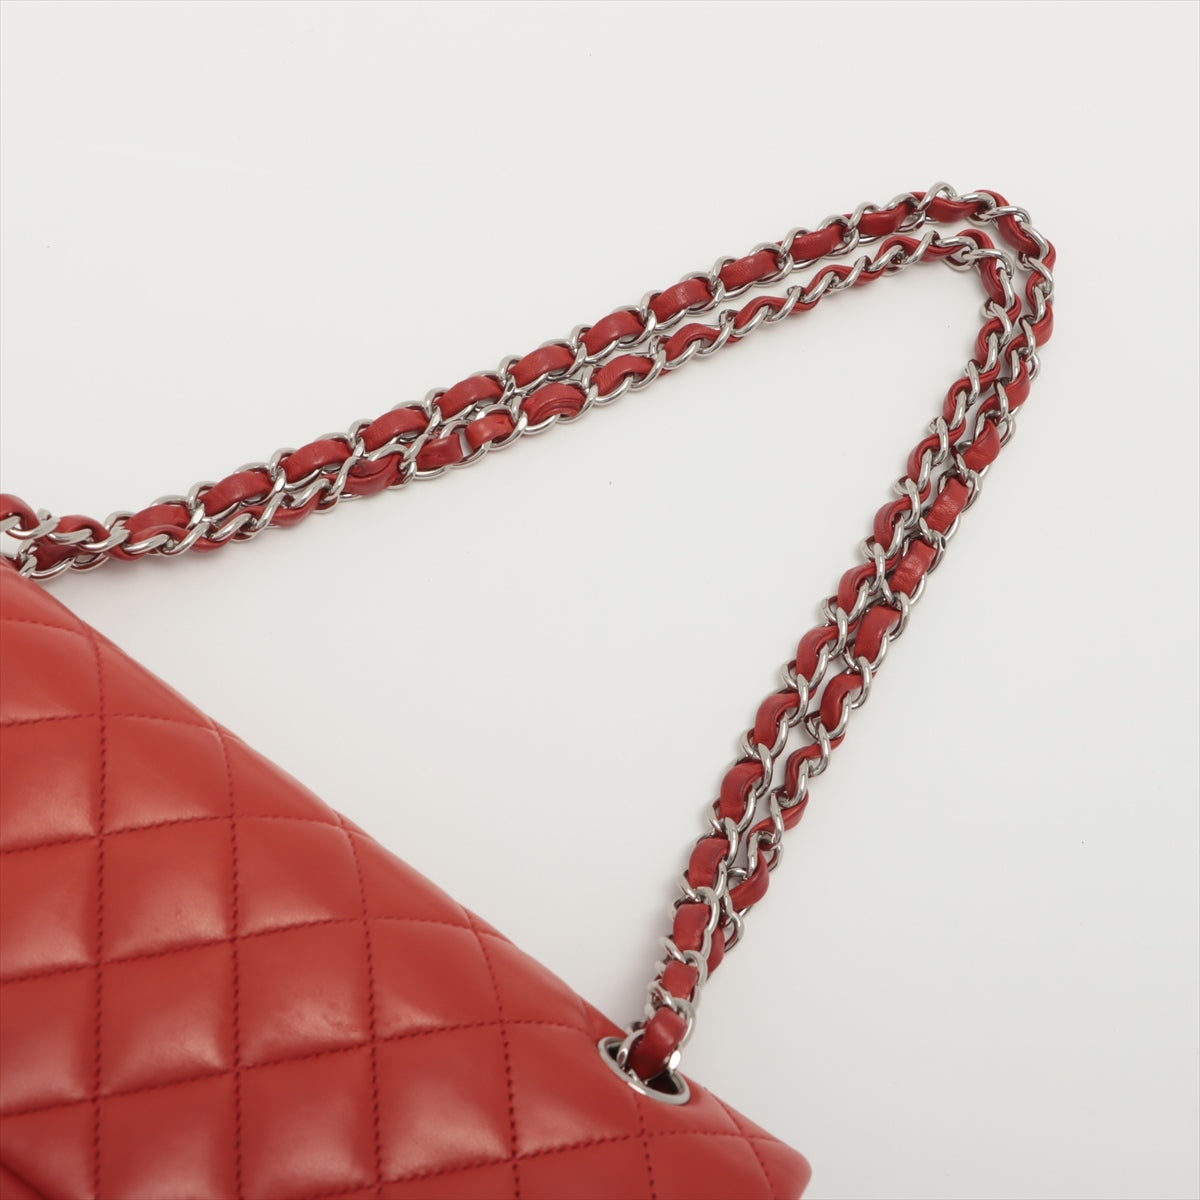 Chanel Matelasse Lambskin Double Flap Double Chain Bag Red Silver Metal Fittings 15XXXXXX